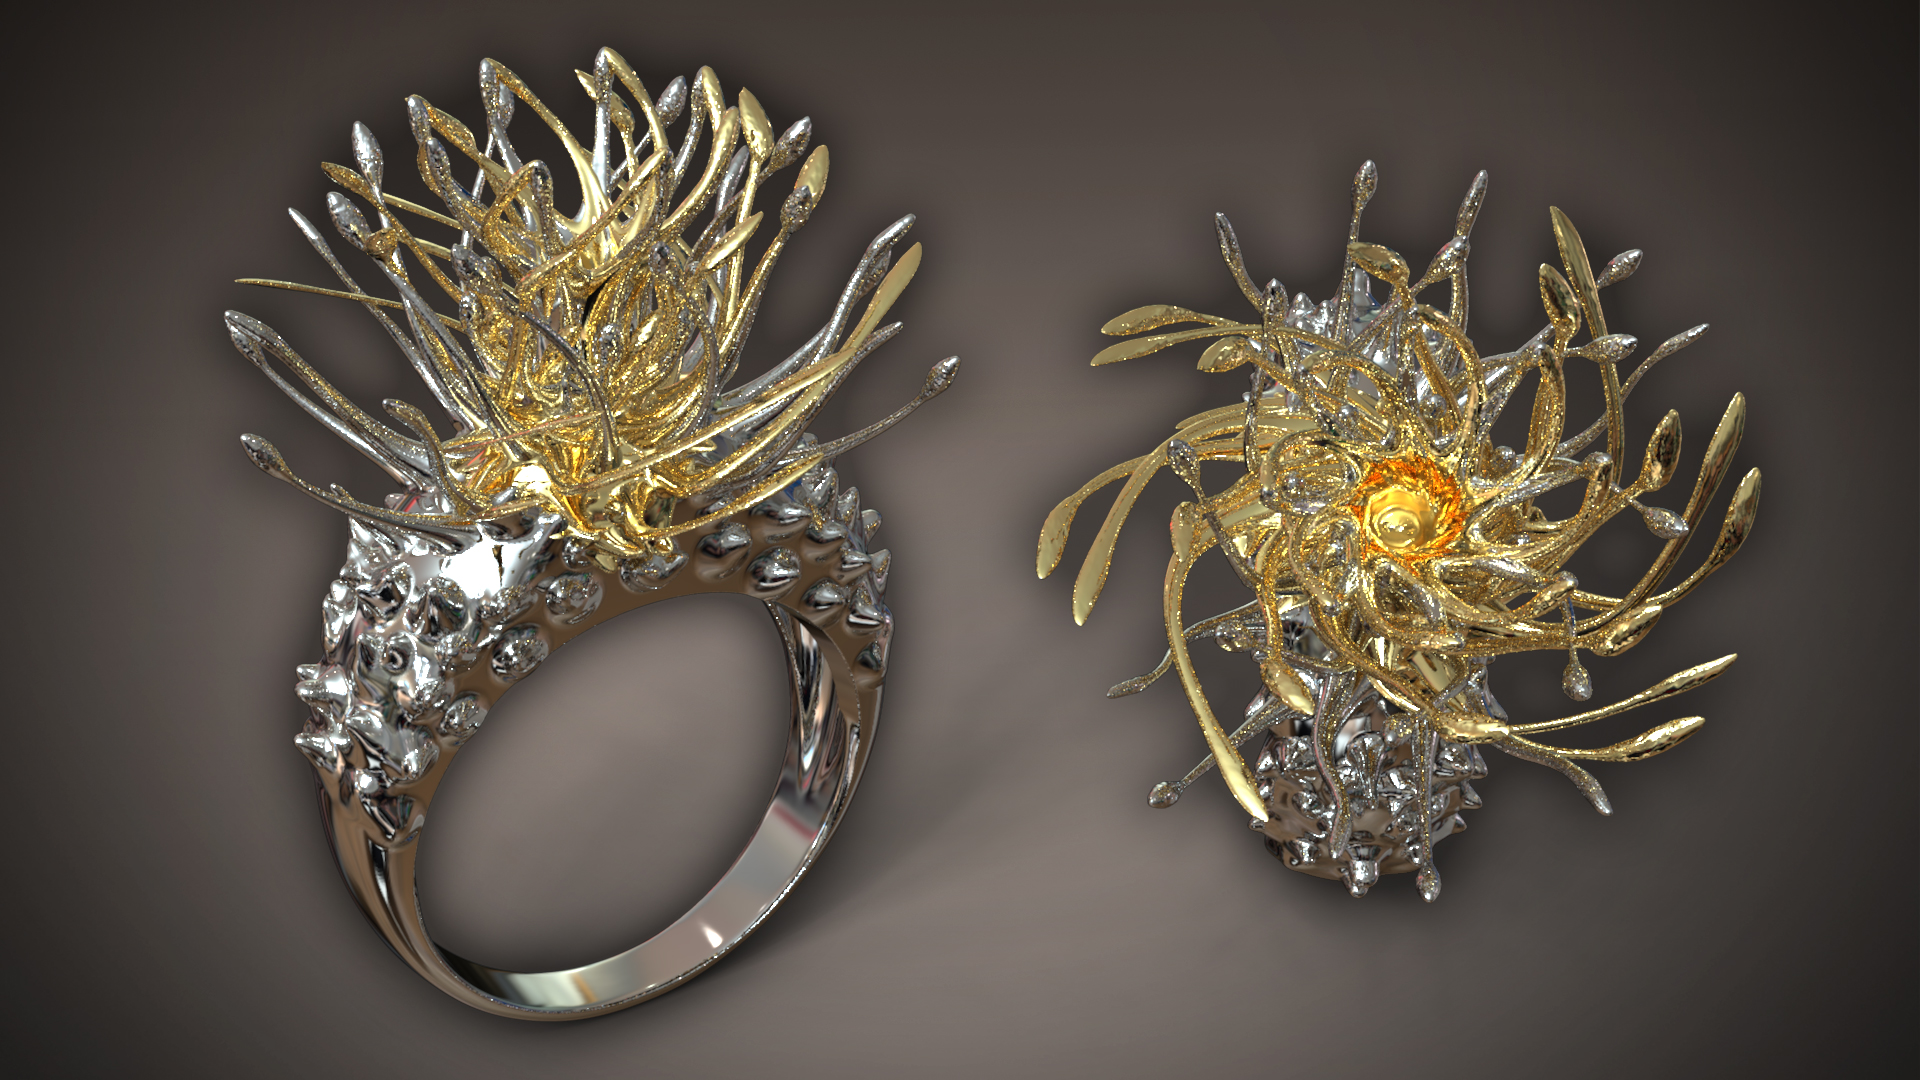 jewlwry design on zbrush online course